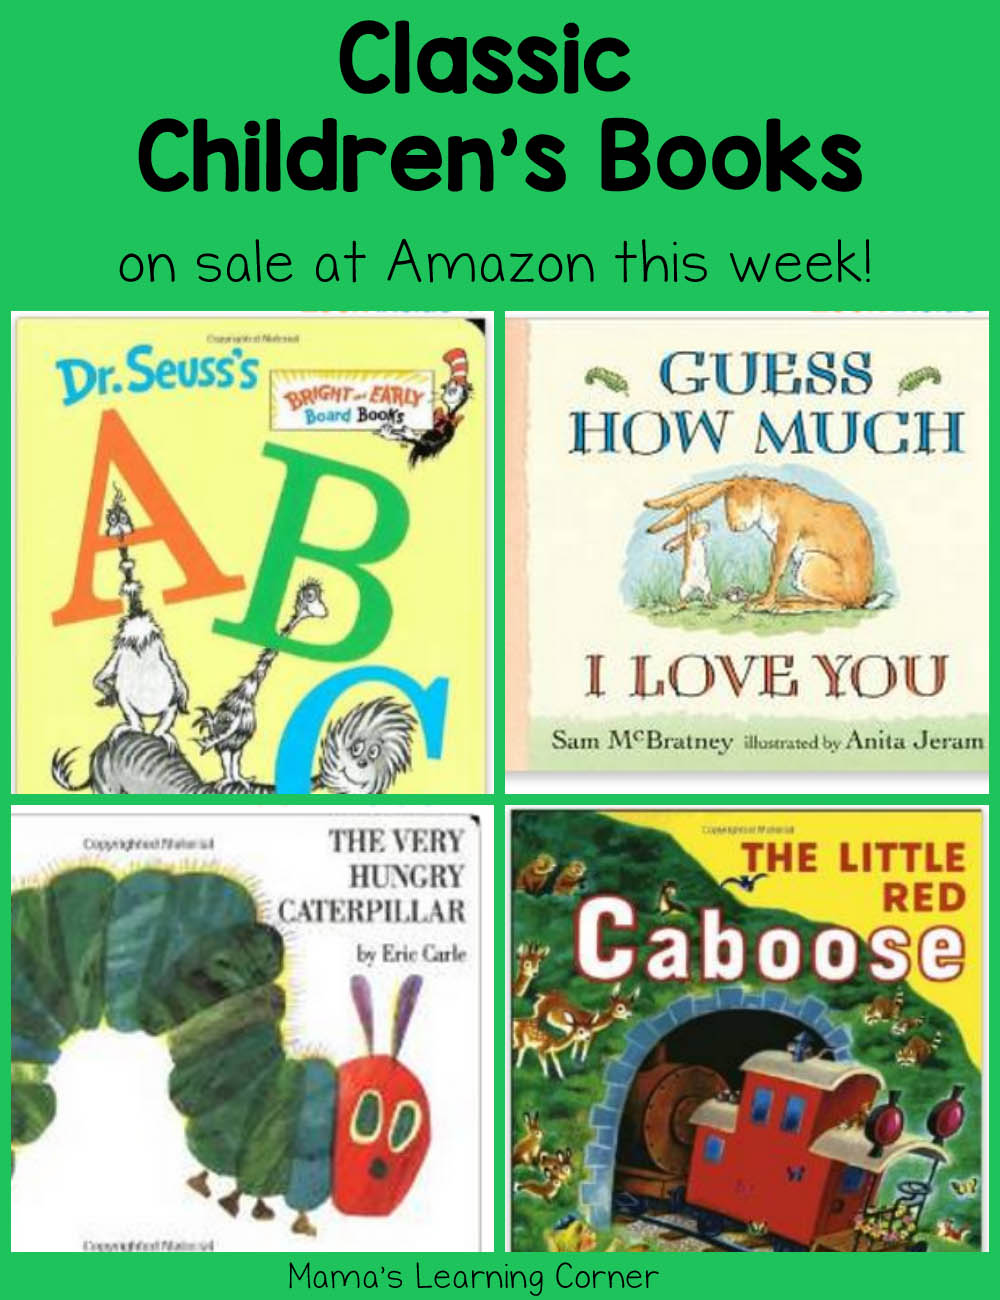 Classic Childrens Books on Sale at Amazon